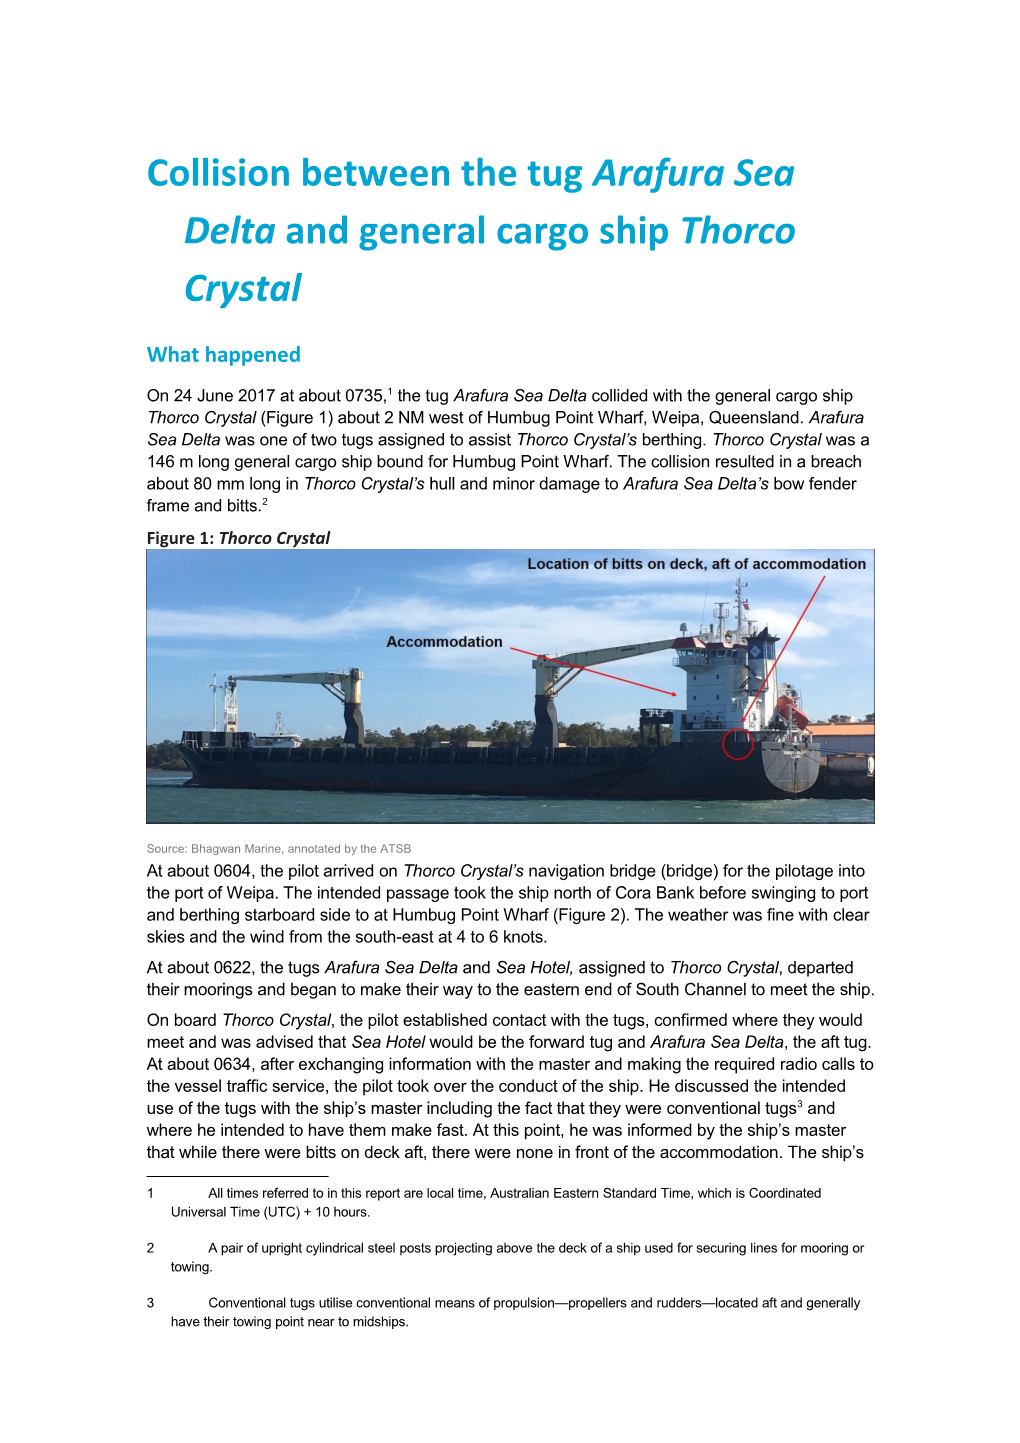 Collision Between the Tug Arafura Sea Delta and General Cargo Ship Thorco Crystal